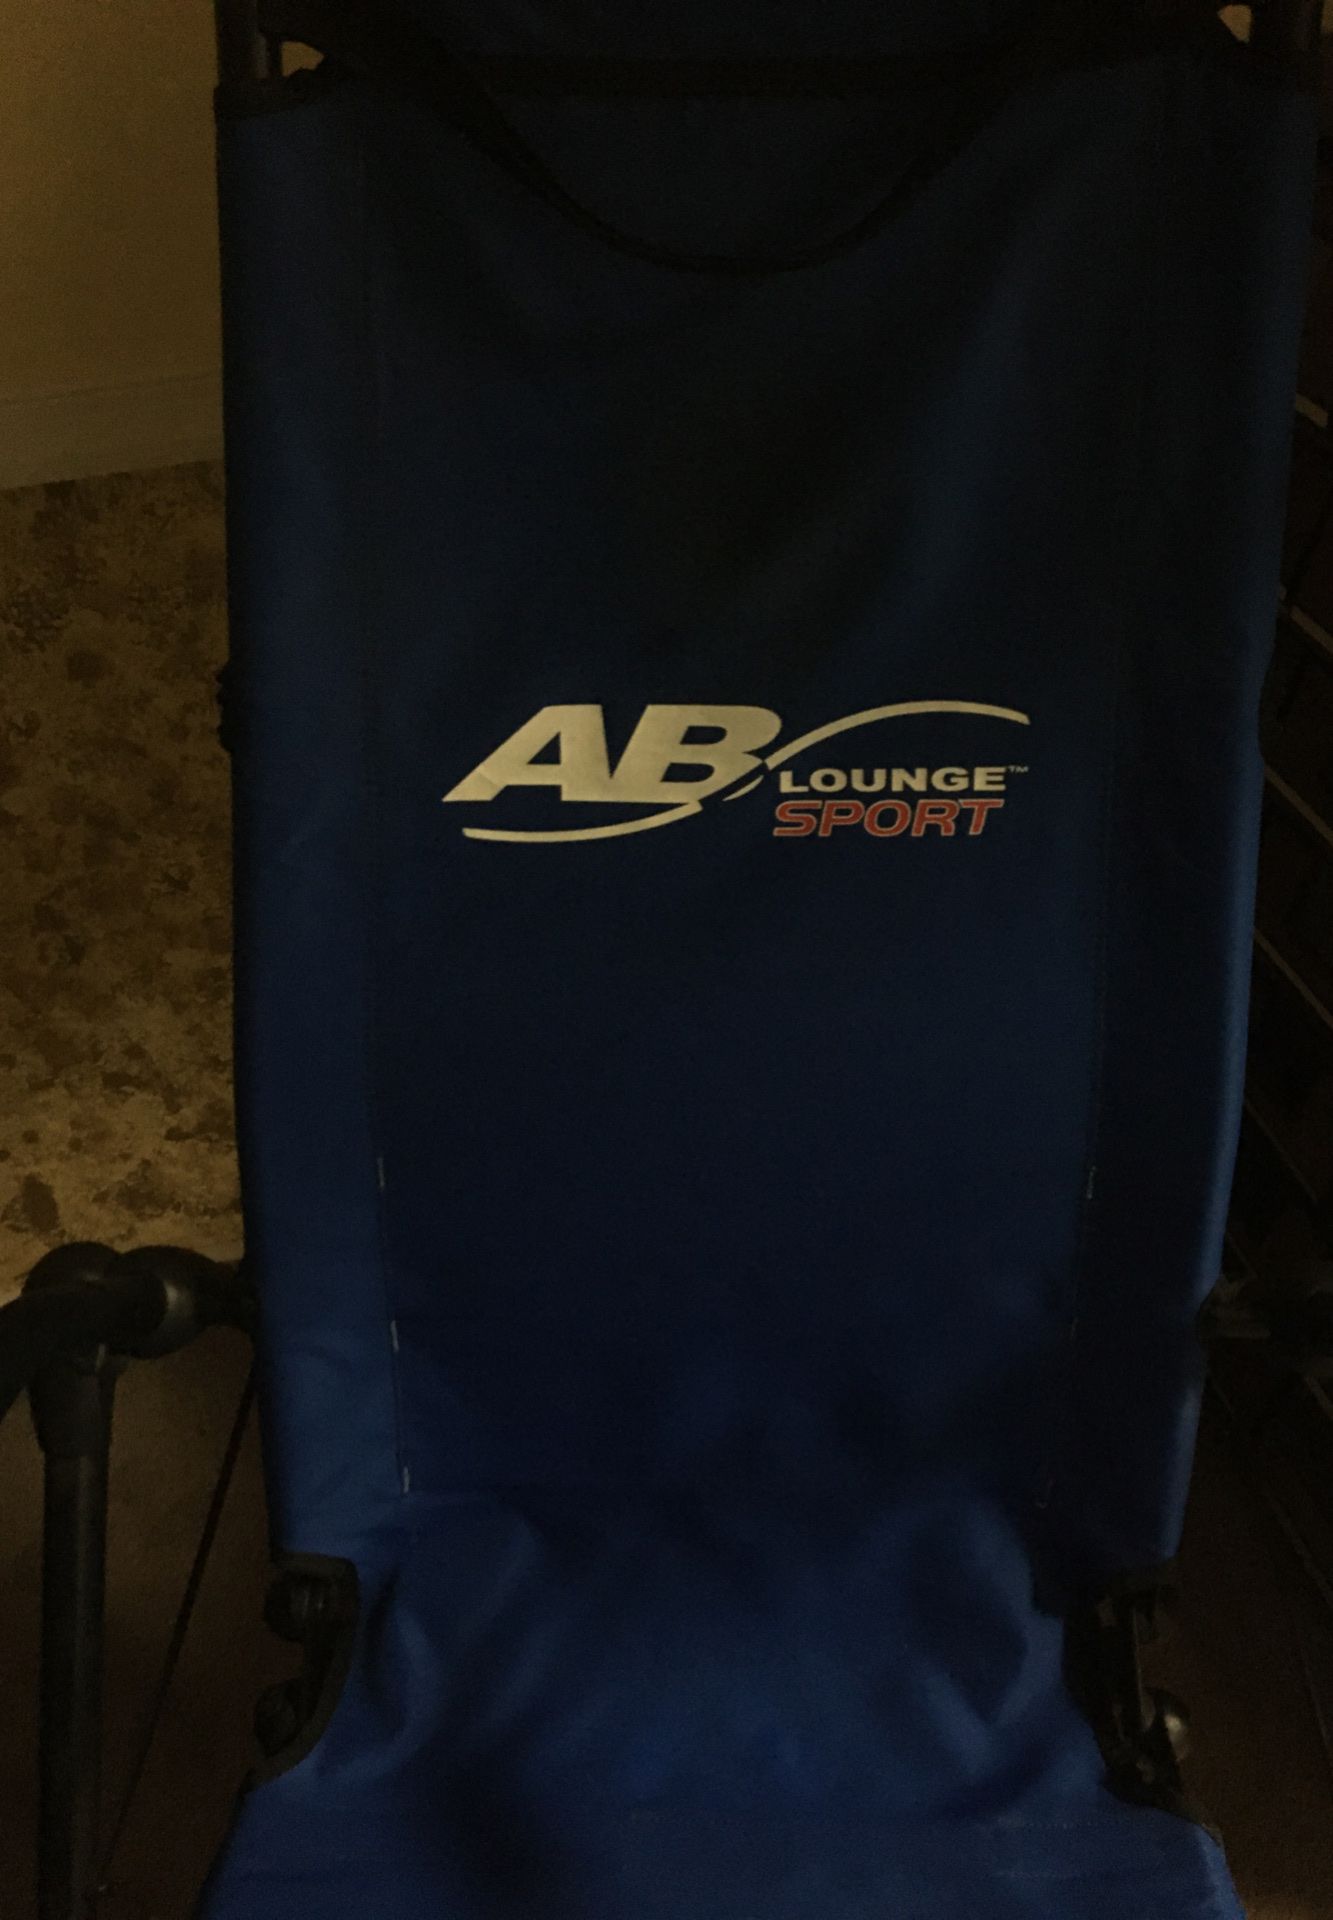 Ab lounger sport exercise machine